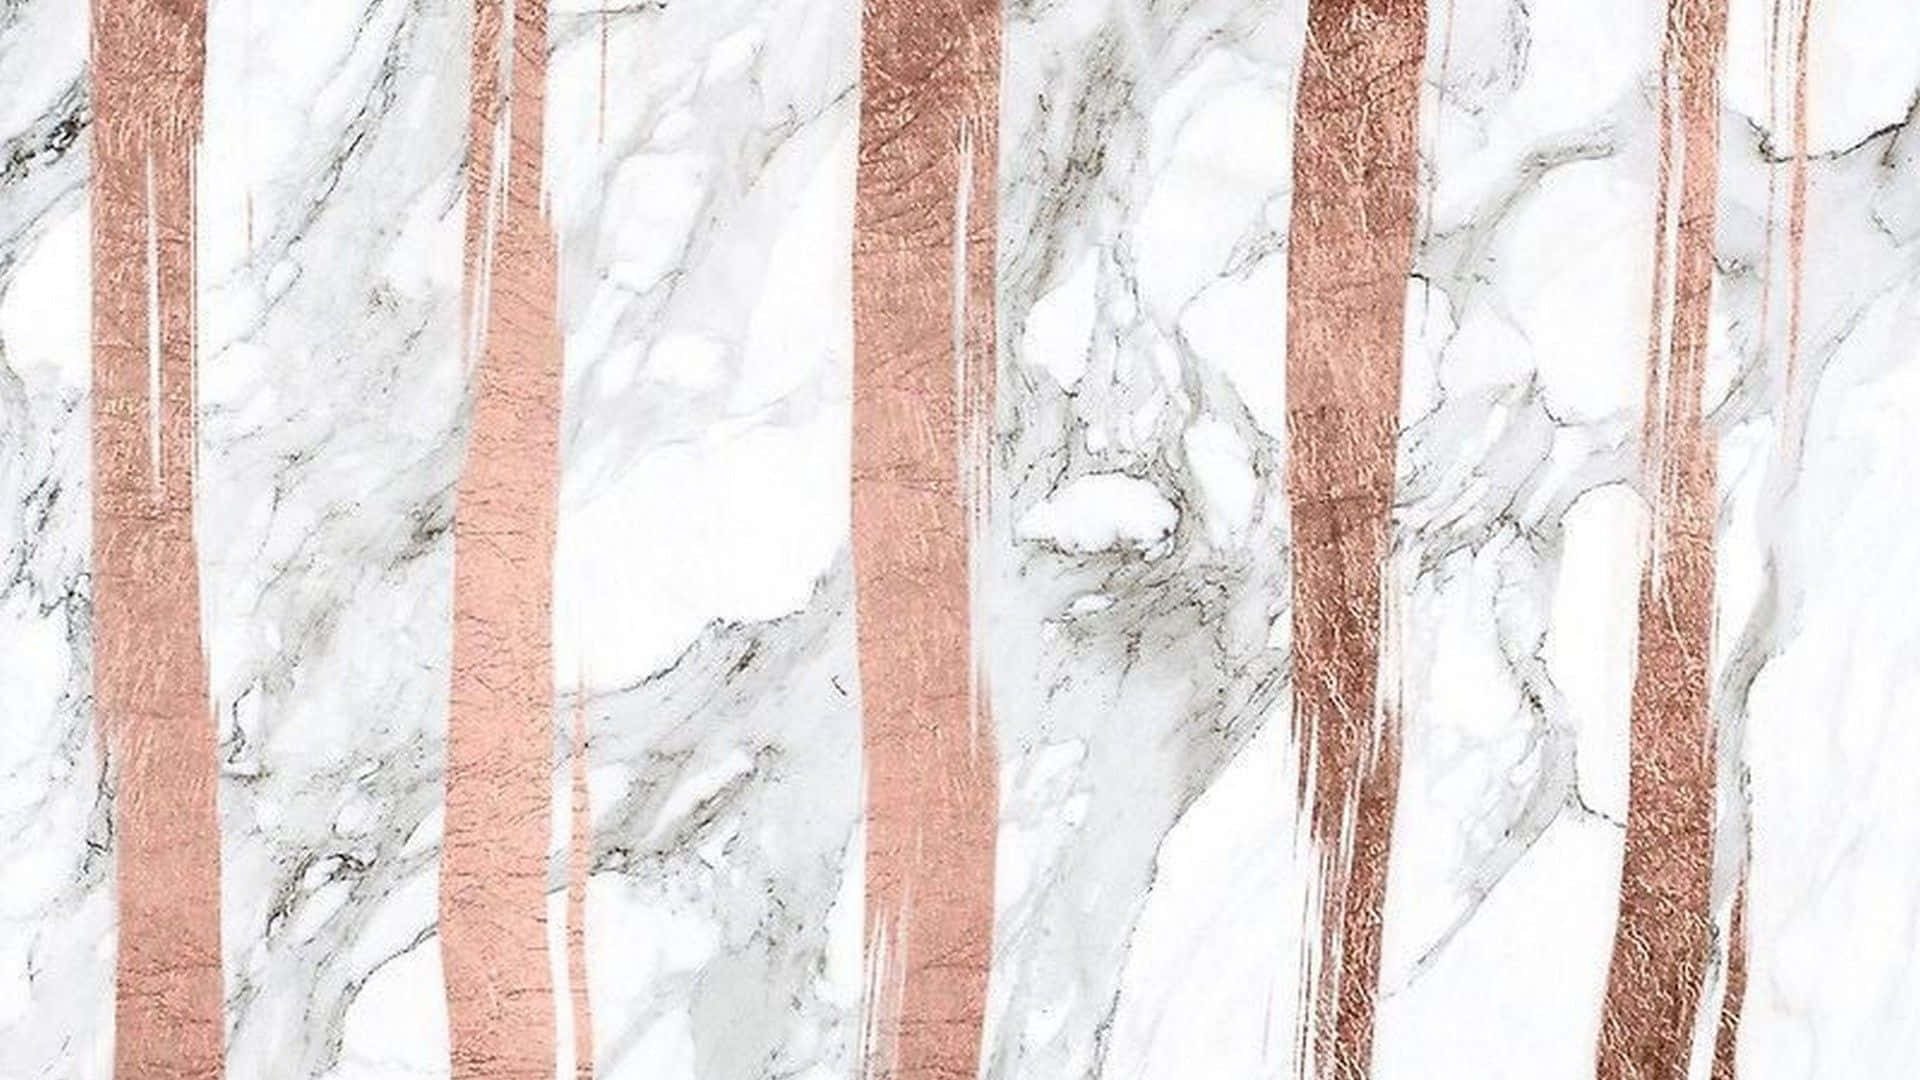 "A sparkly, sophisticated Rose Gold Marble background"